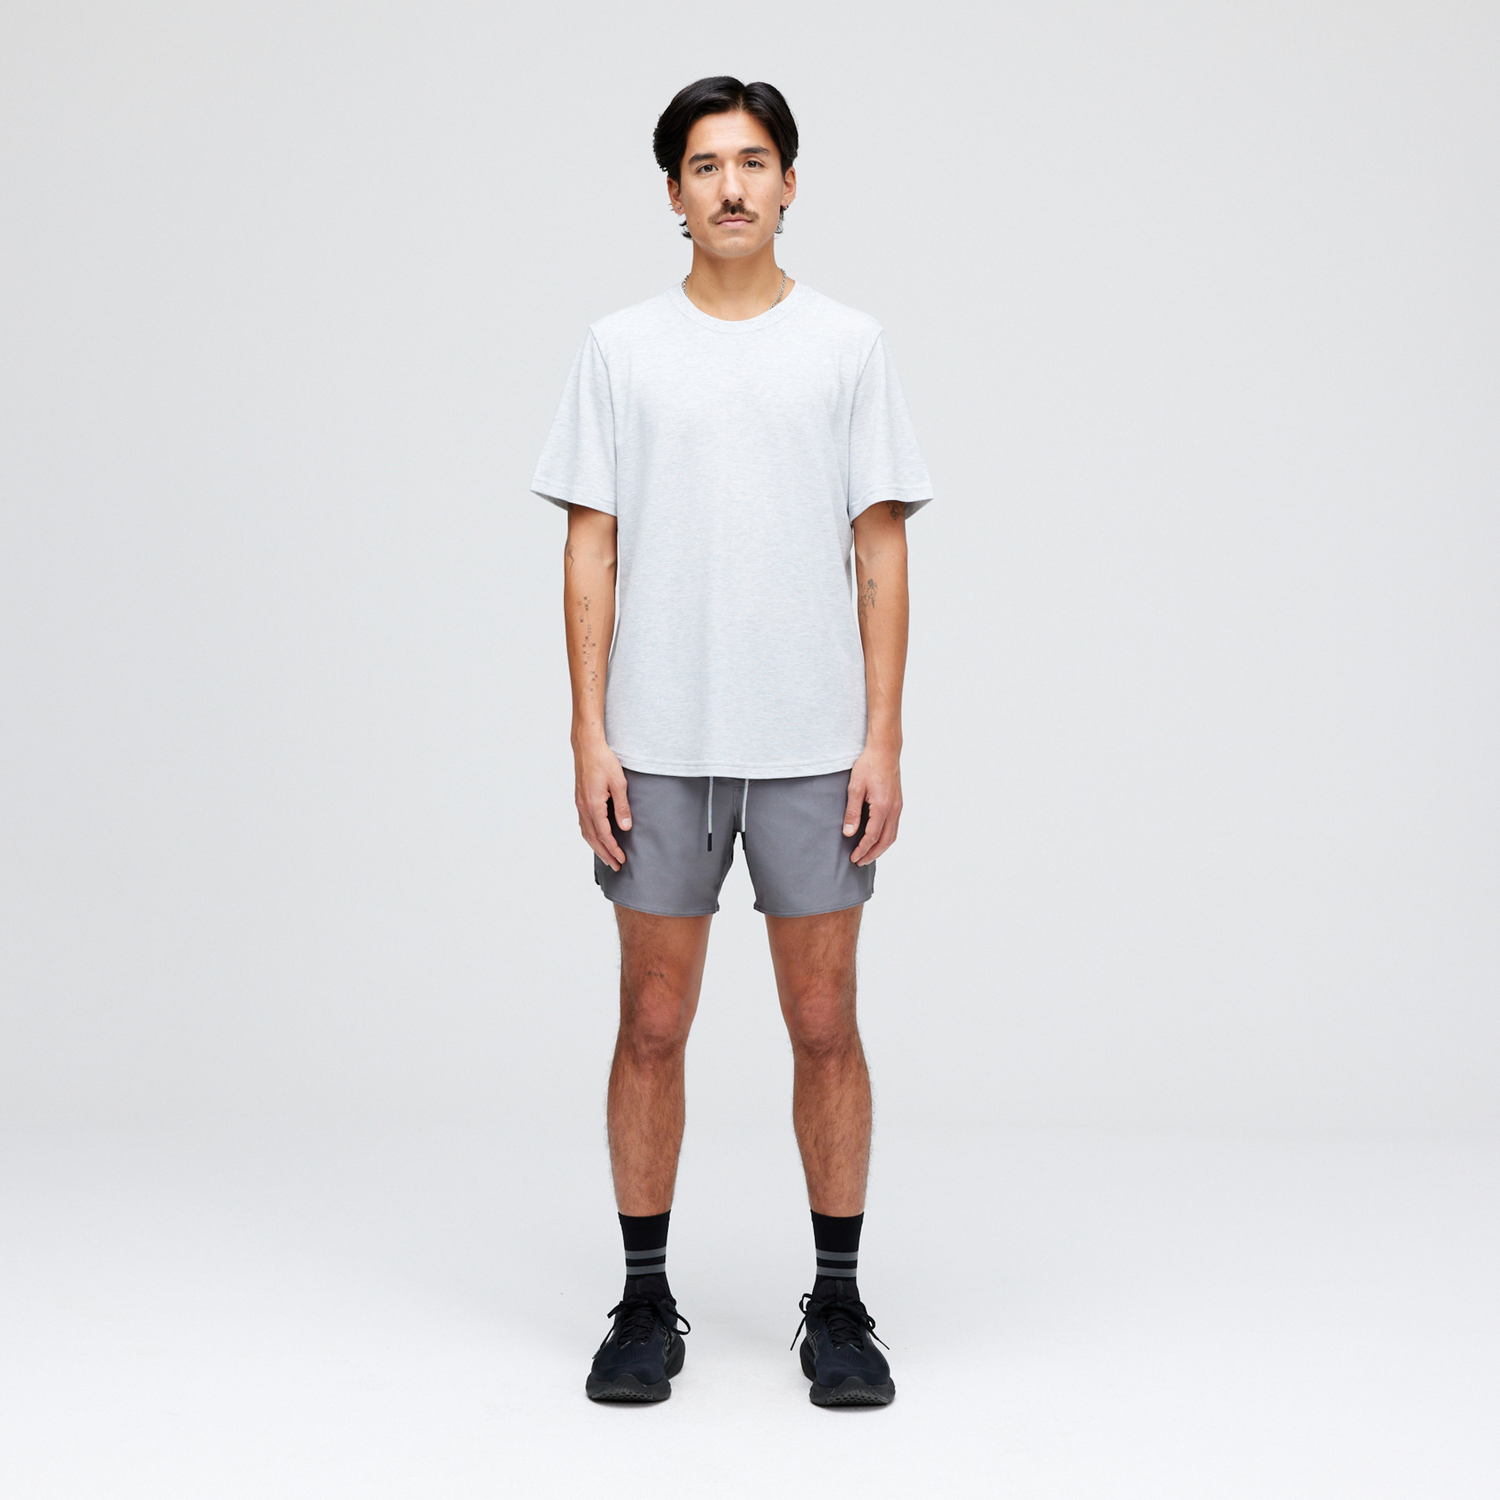 Stance Complex Athletic Short 5" Charcoal |model